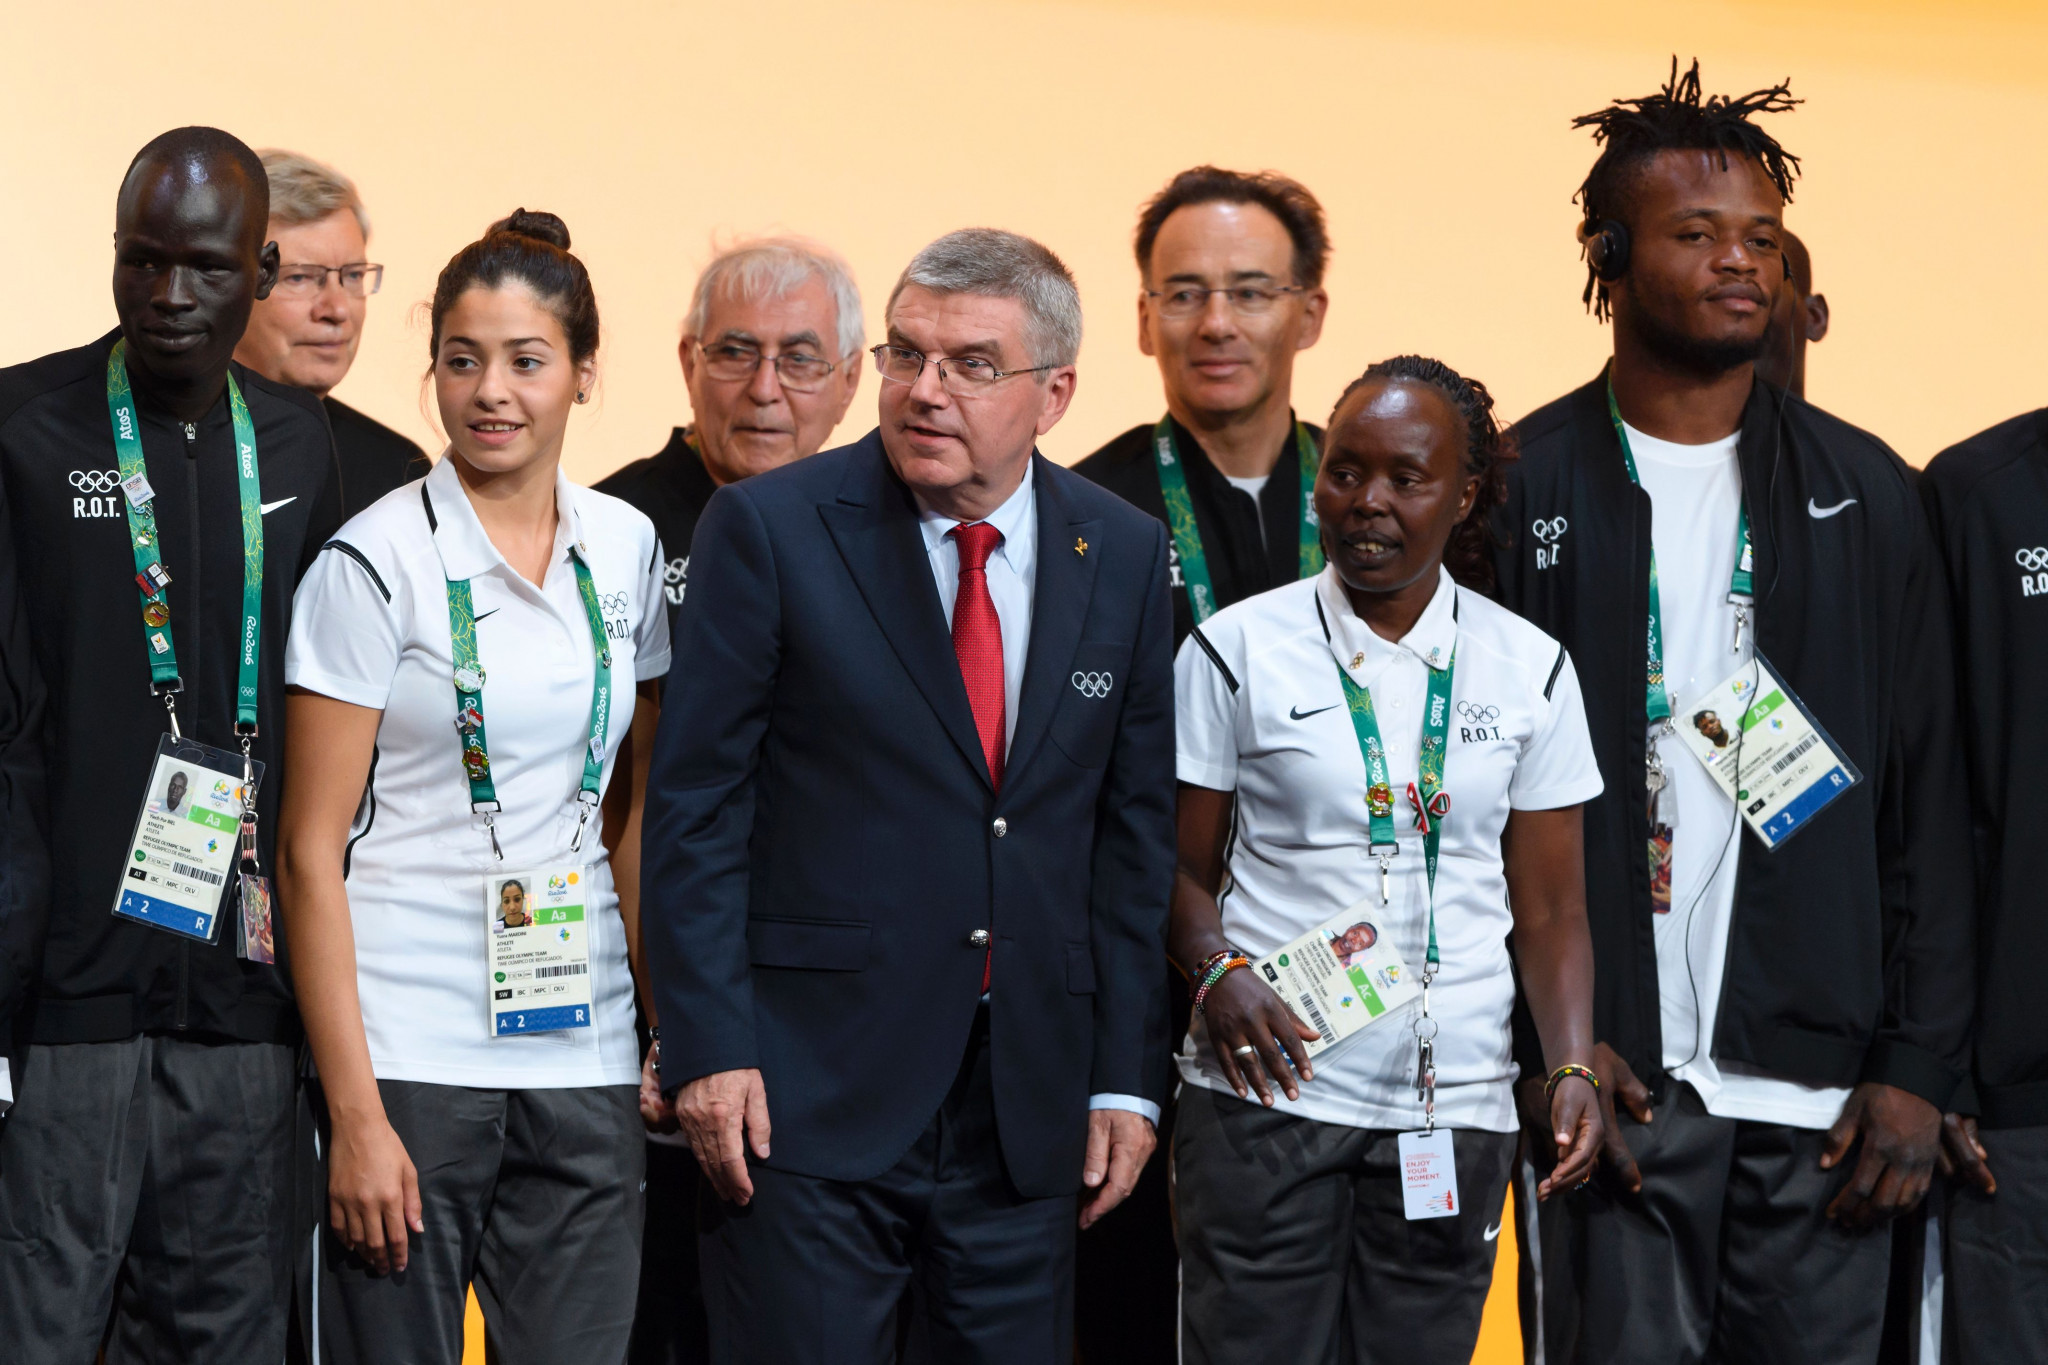 International Olympic Committee (IOC) President Thomas Bach (C) poses with a team of Refugee Olympic Athletes and their trainers during the 129th IOC session in Rio de Janeiro on August 2, 2016. © Getty Images